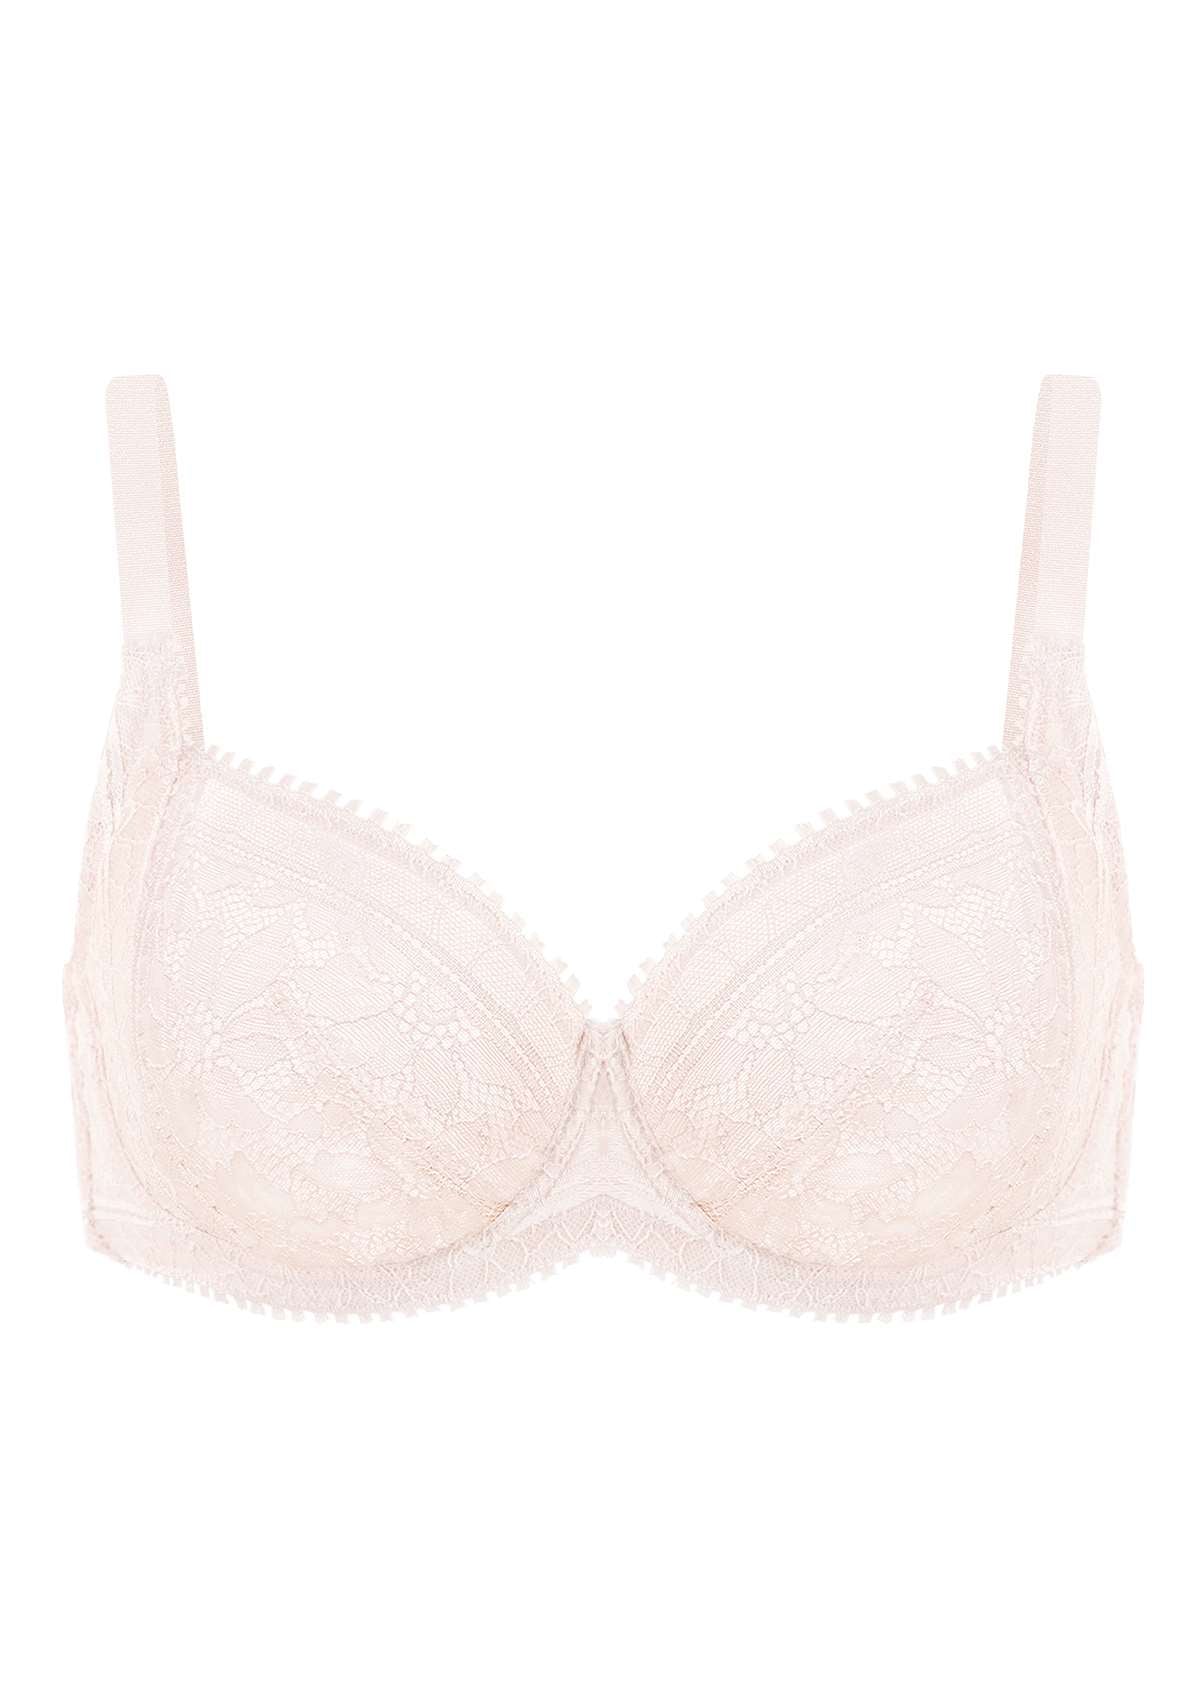 HSIA Silene Floral Delicate Unlined Lace Soft Cup Uplift Bra - Champagne / 40 / DD/E